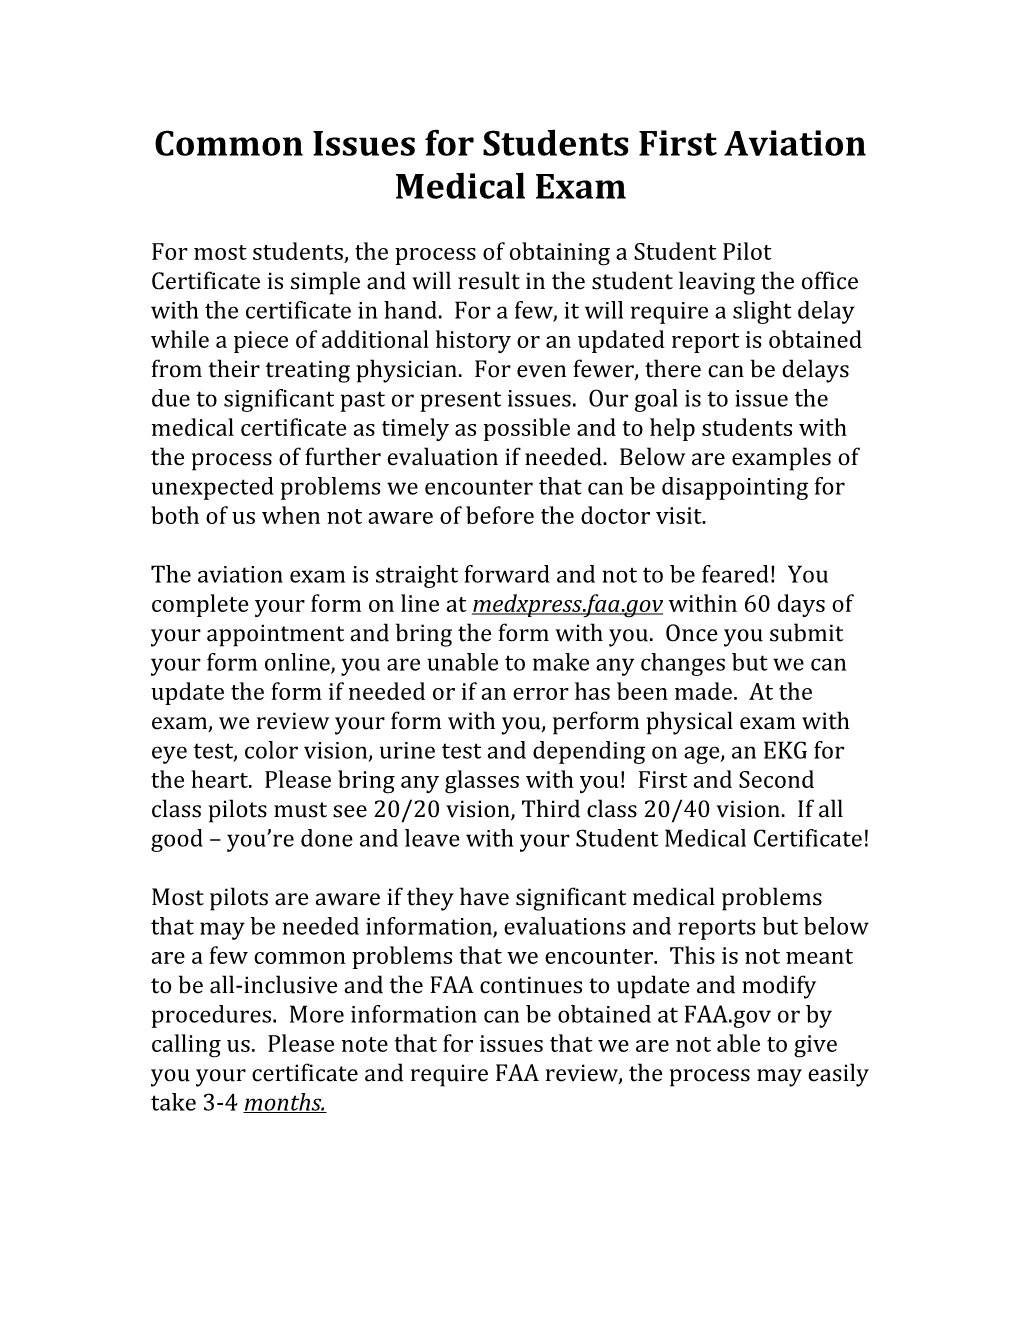 Common Issues for Students First Aviation Medical Exam